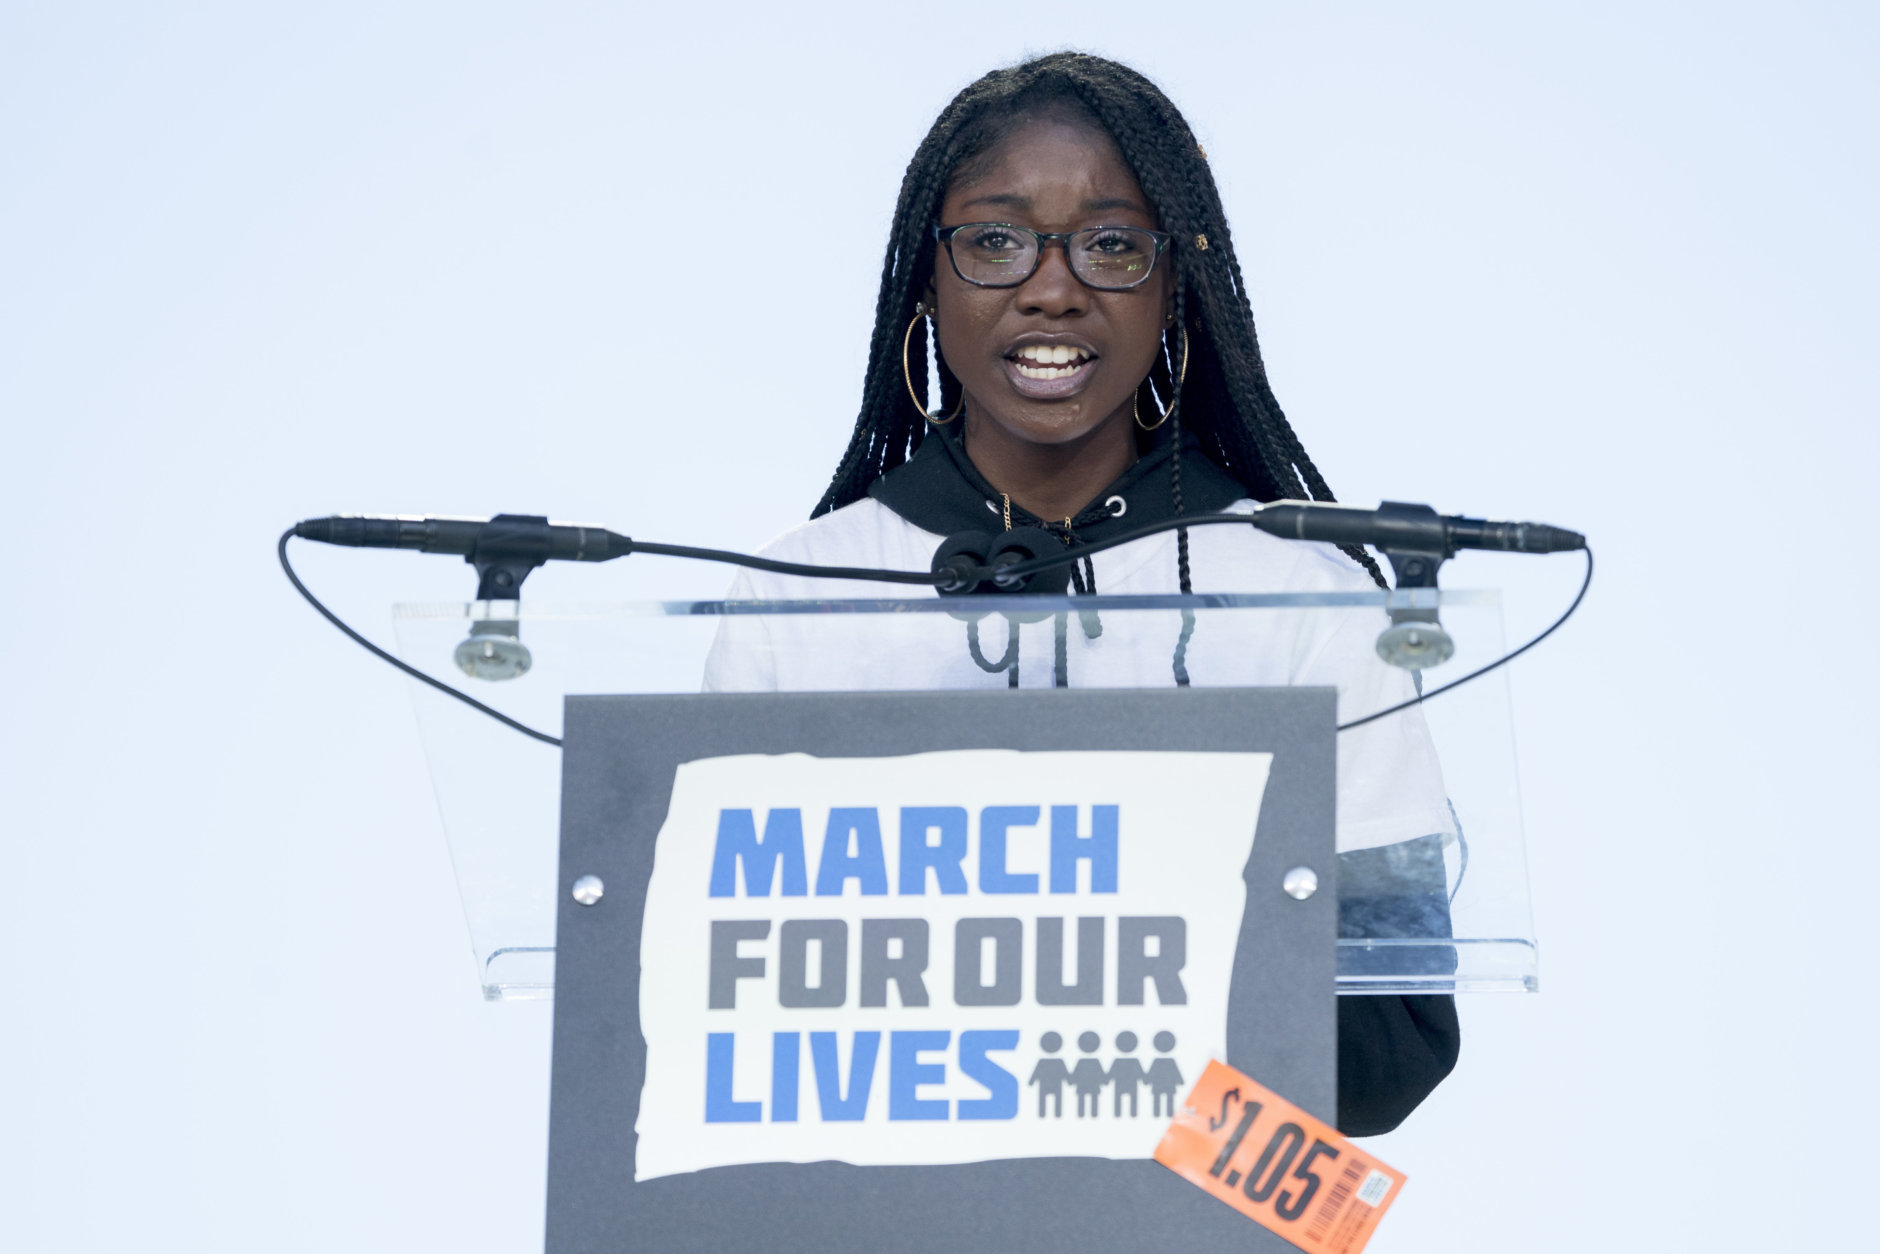 Student Aalayah Eastmond, a survivor of the mass shooting at Marjory Stoneman Douglas High School in Parkland, Fla., speaks during the "March for Our Lives" rally in support of gun control in Washington, Saturday, March 24, 2018. (AP Photo/Andrew Harnik)